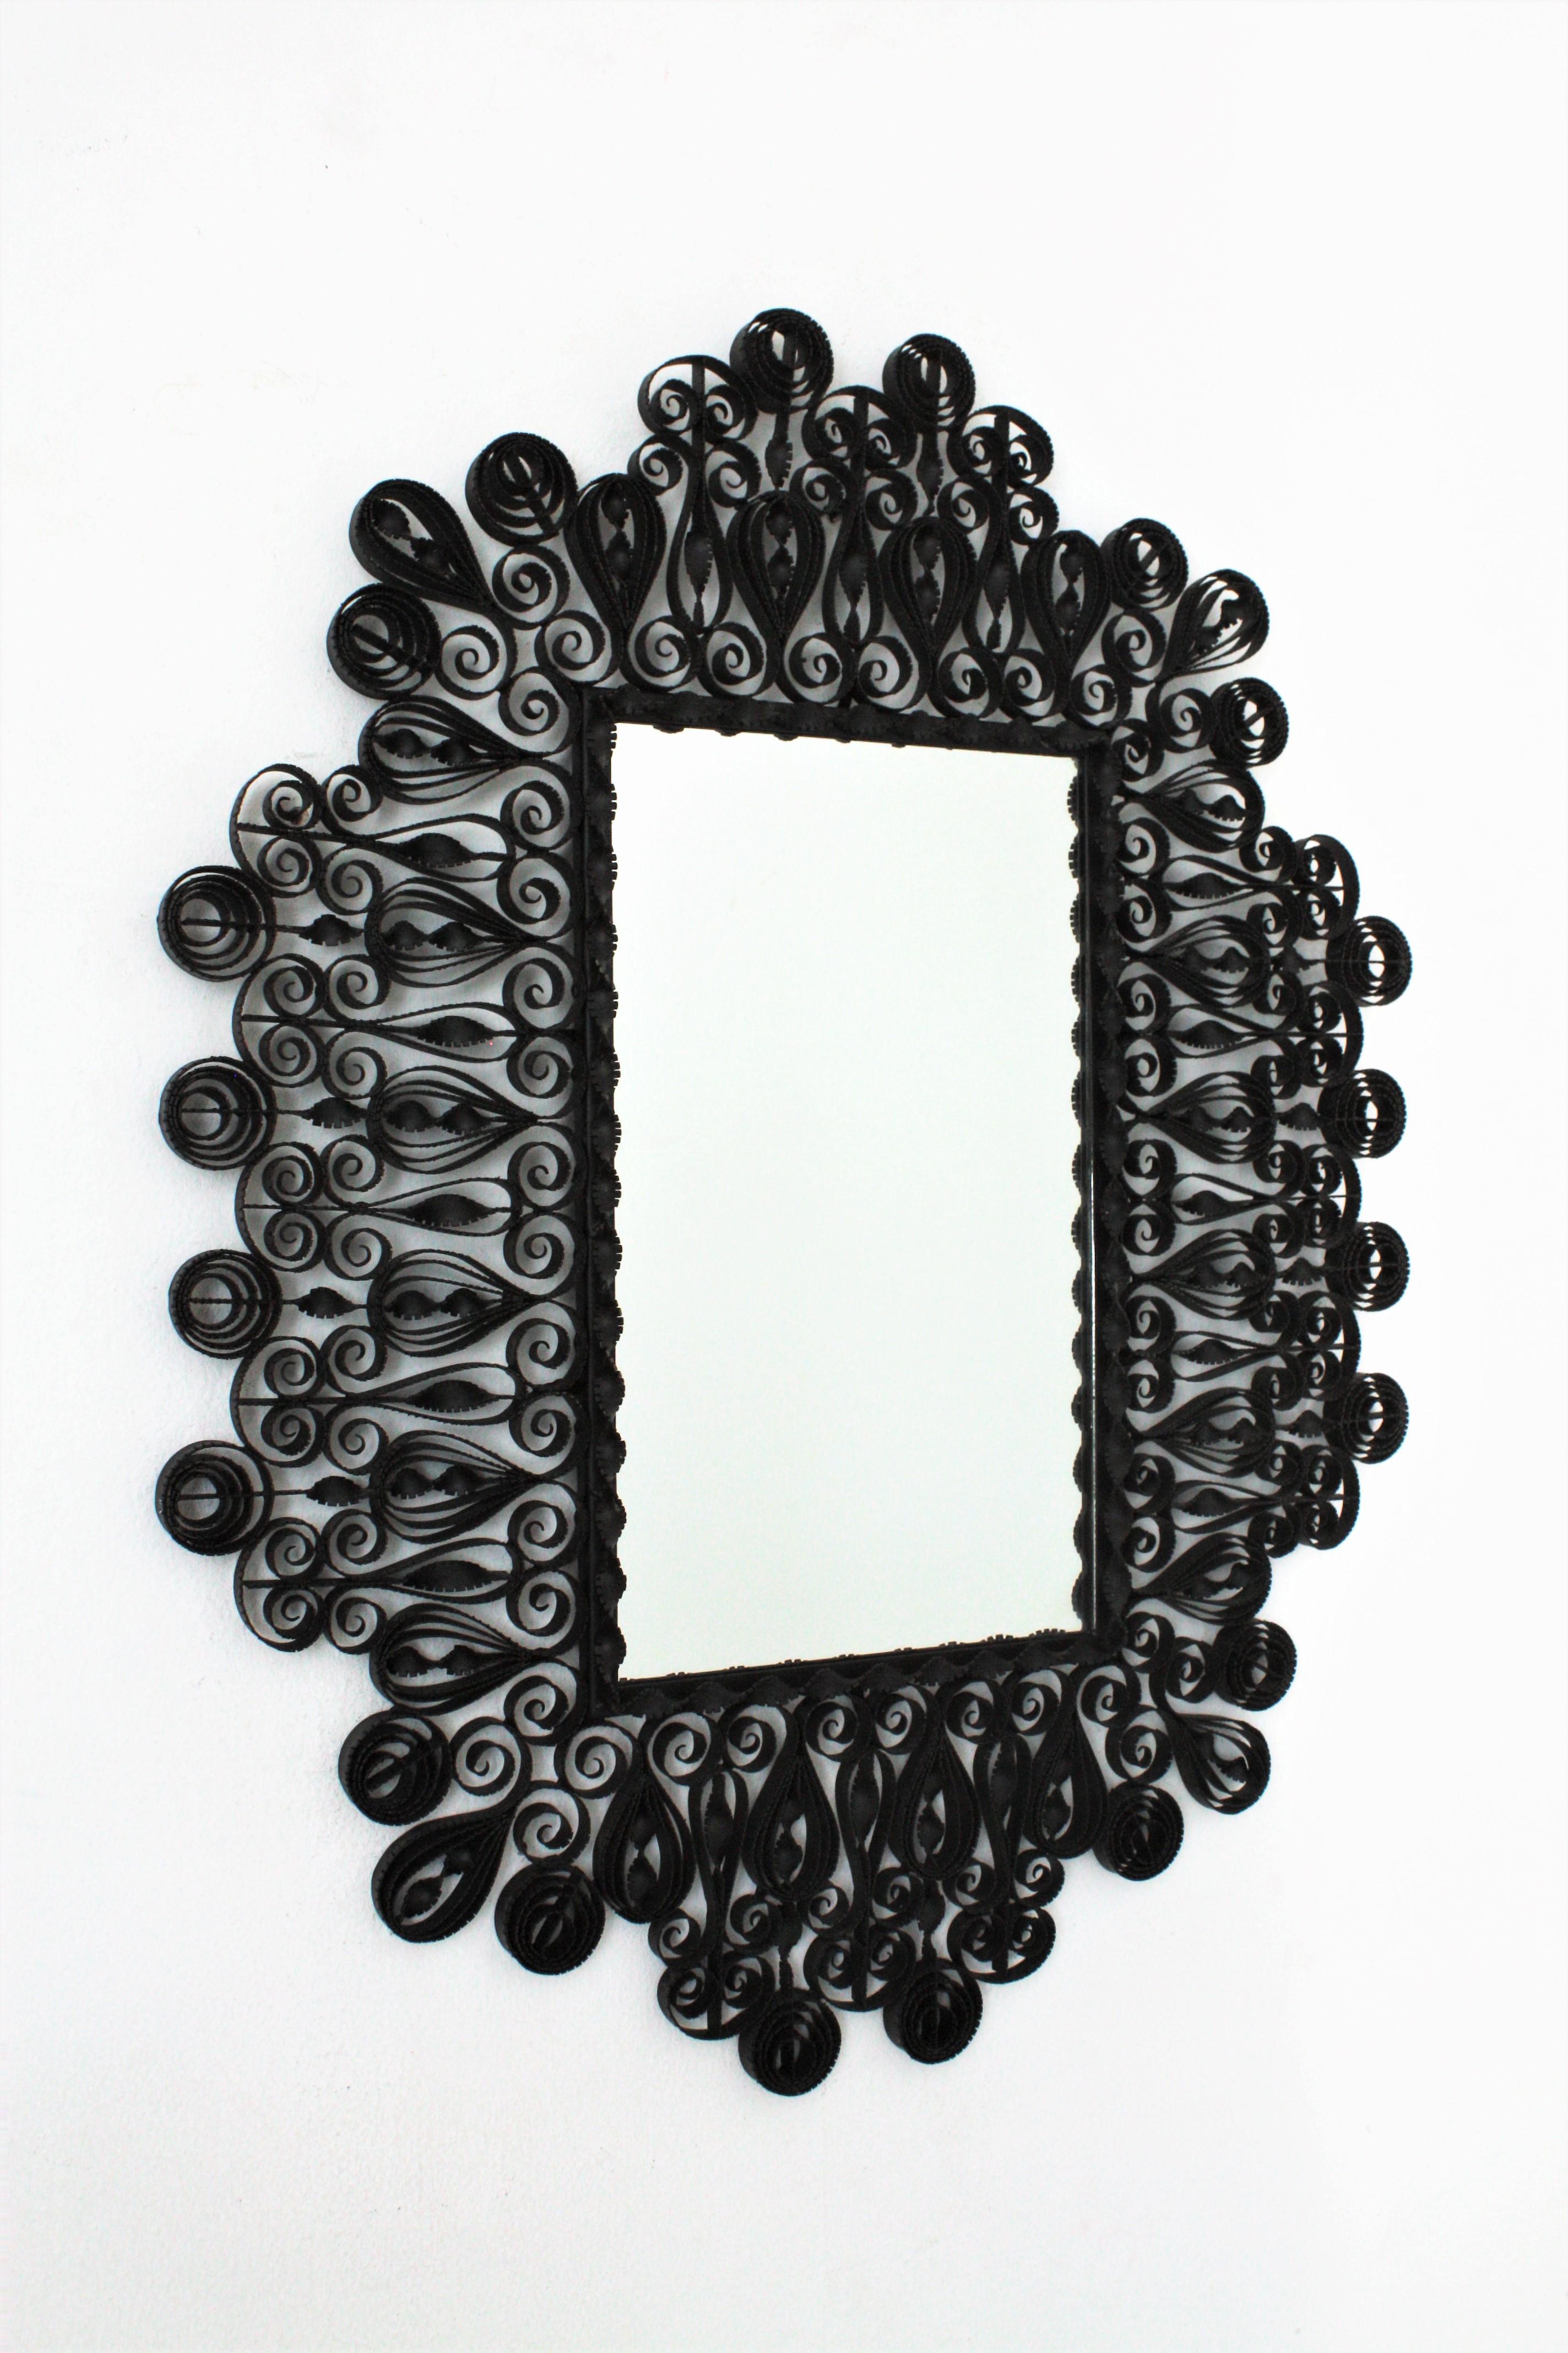 Spanish Gothic Revival Wrought Iron Mirror with Scroll and Twisting Frame, Spain, 1940s